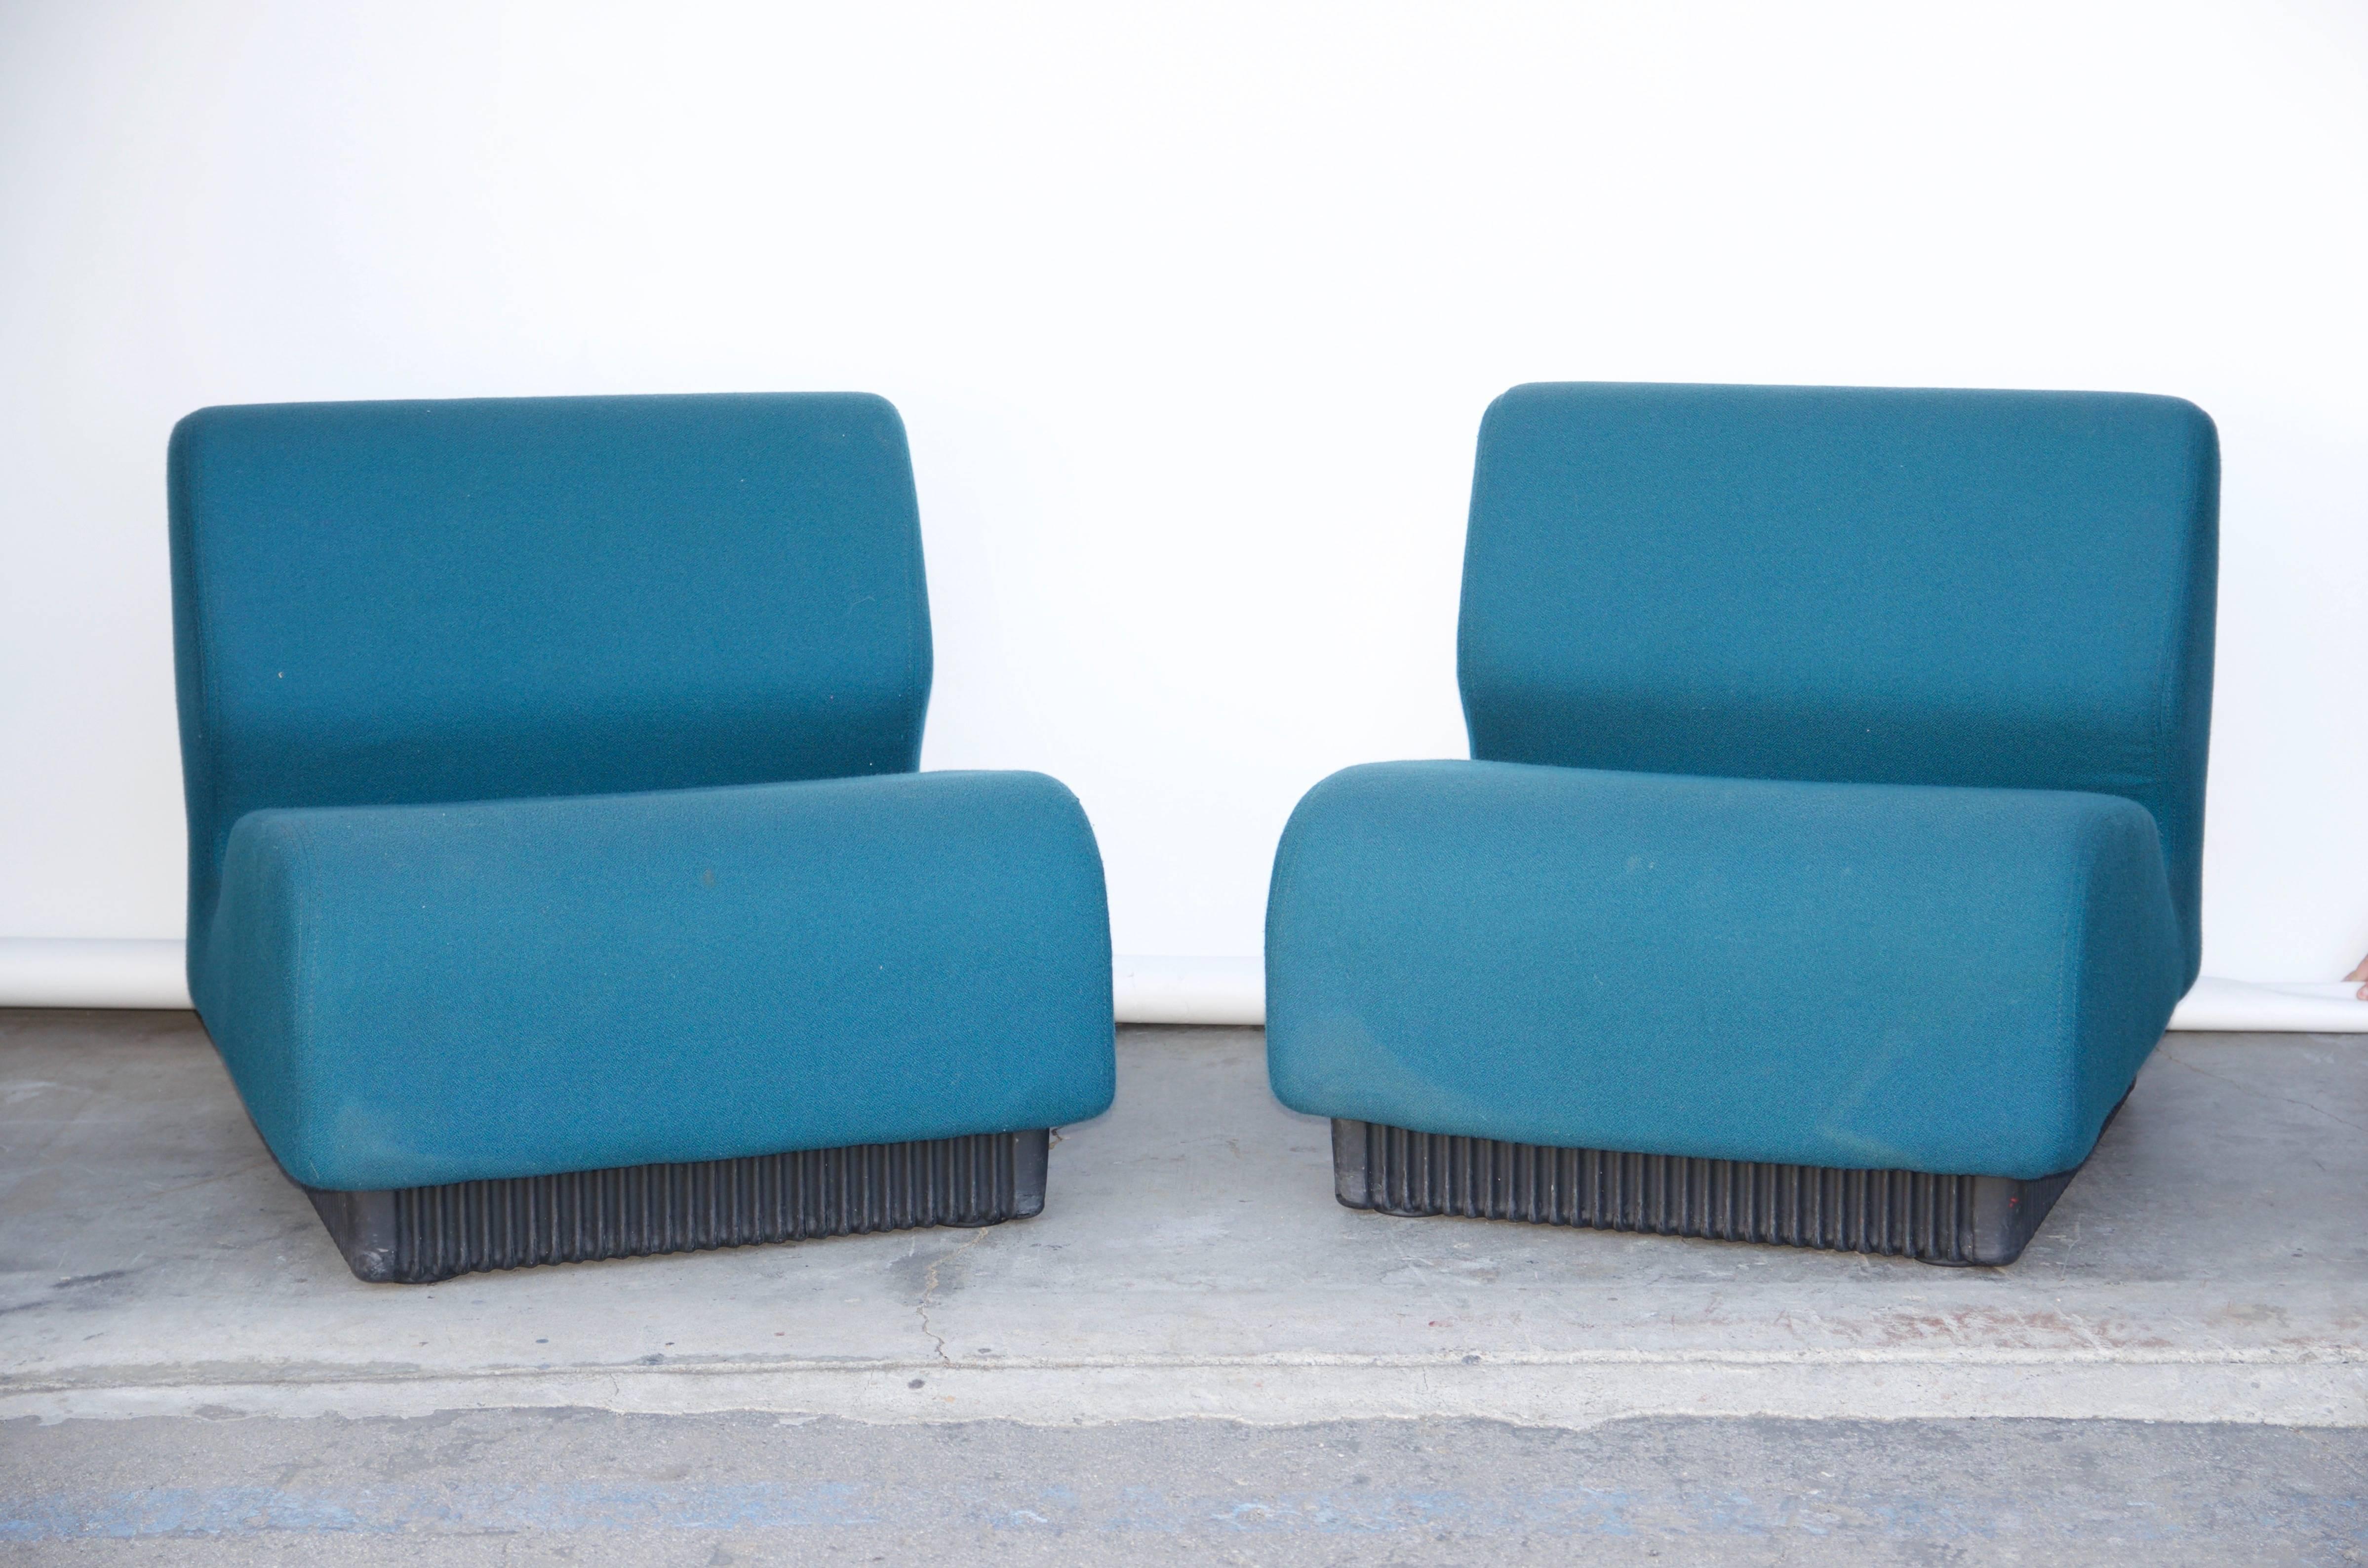 American Modular Settee by Don Chadwick for Herman Miller